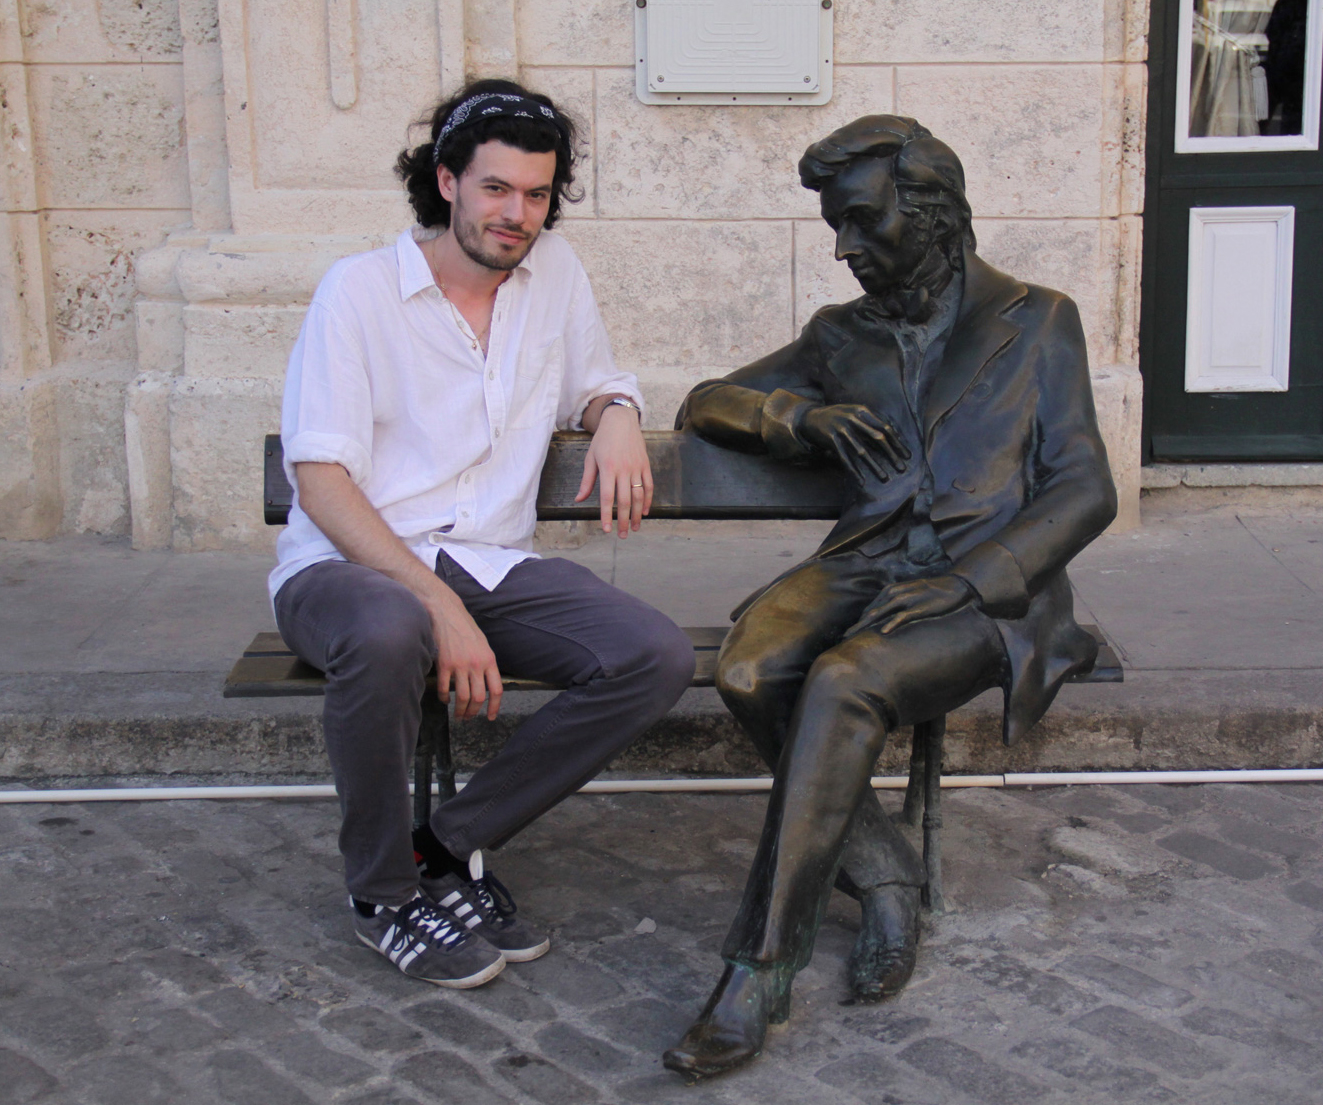 A statue of Chopin in Cuba and I